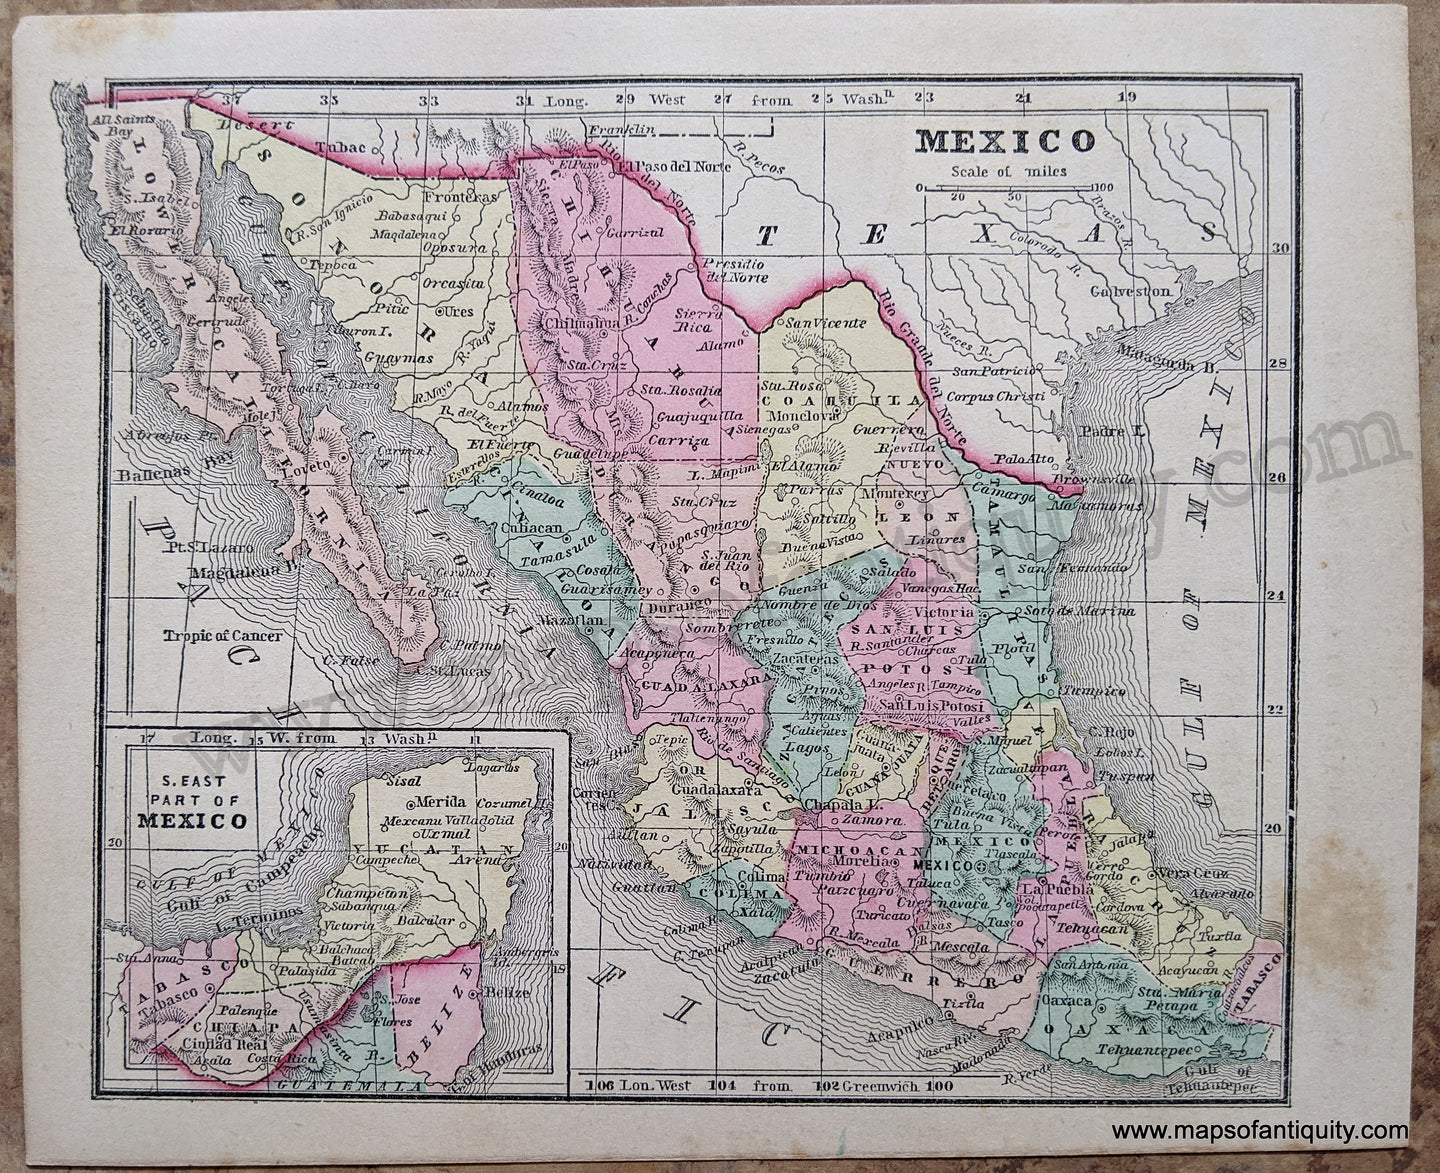 Antique-Hand-Colored-Map-Mexico-Mexico--1857-Morse-and-Gaston-Maps-Of-Antiquity-1800s-19th-century